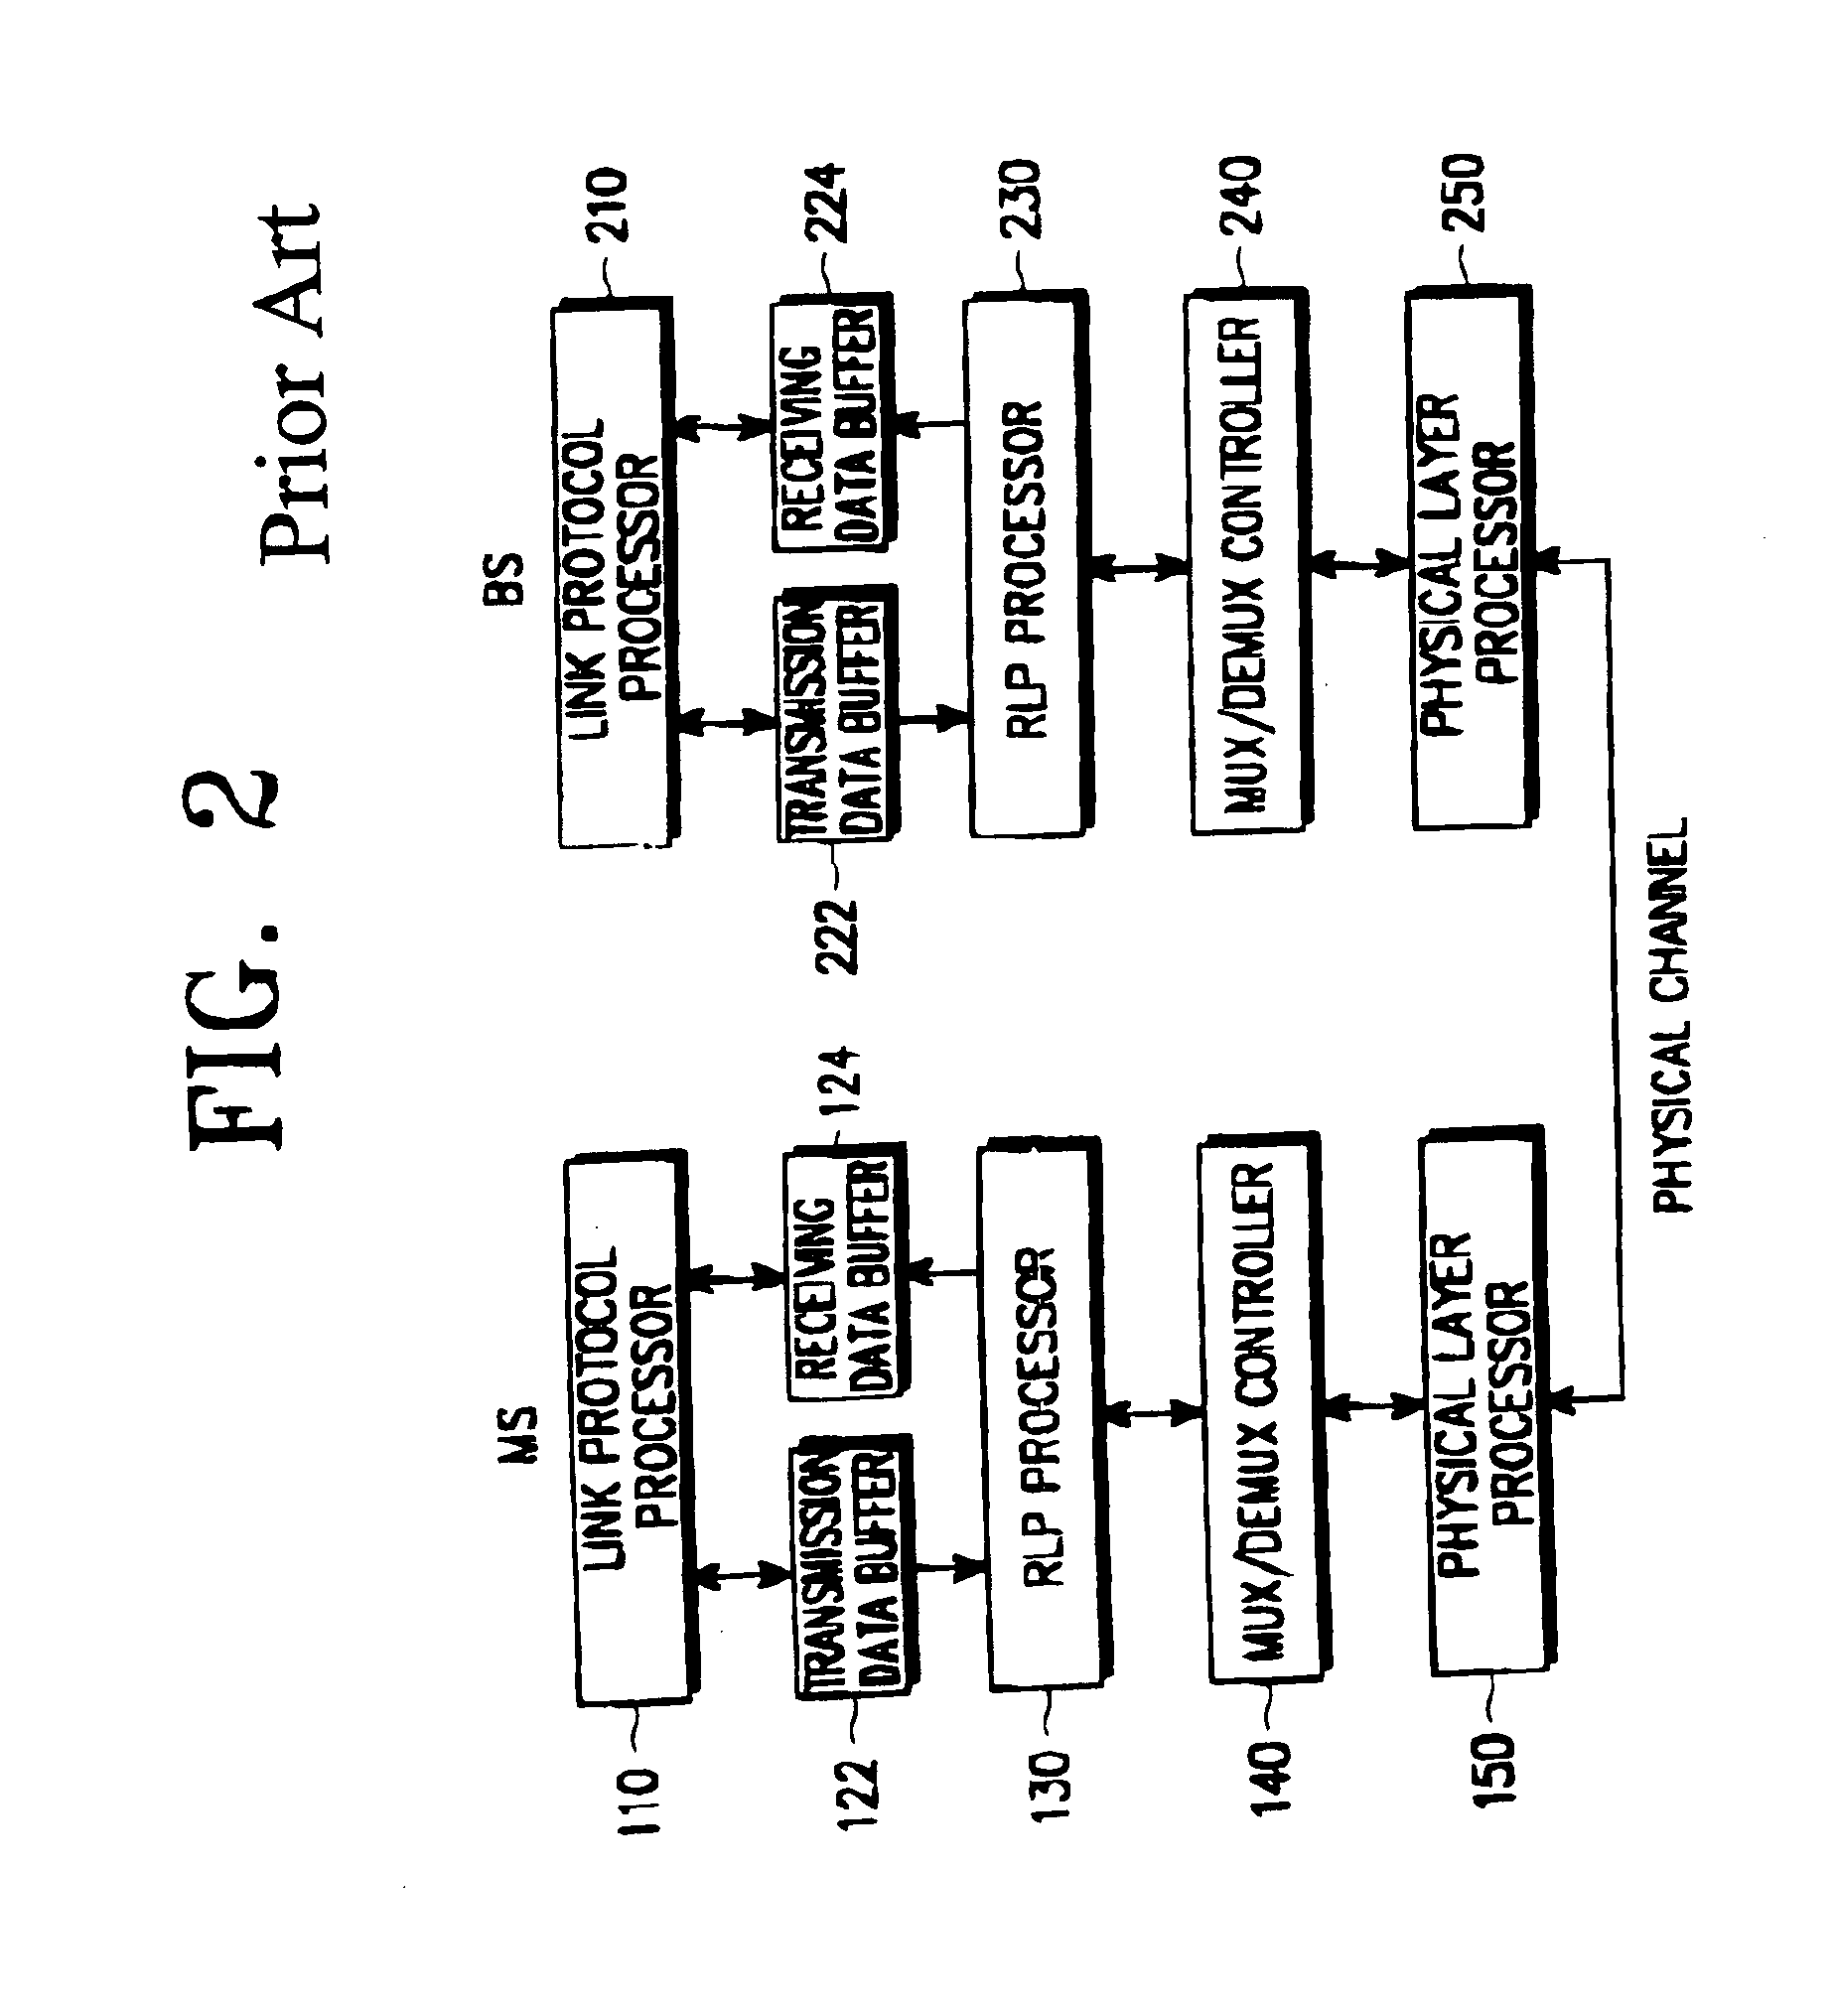 Apparatus and method for transmitting and receiving data according to radio link protocol in a mobile communications systems